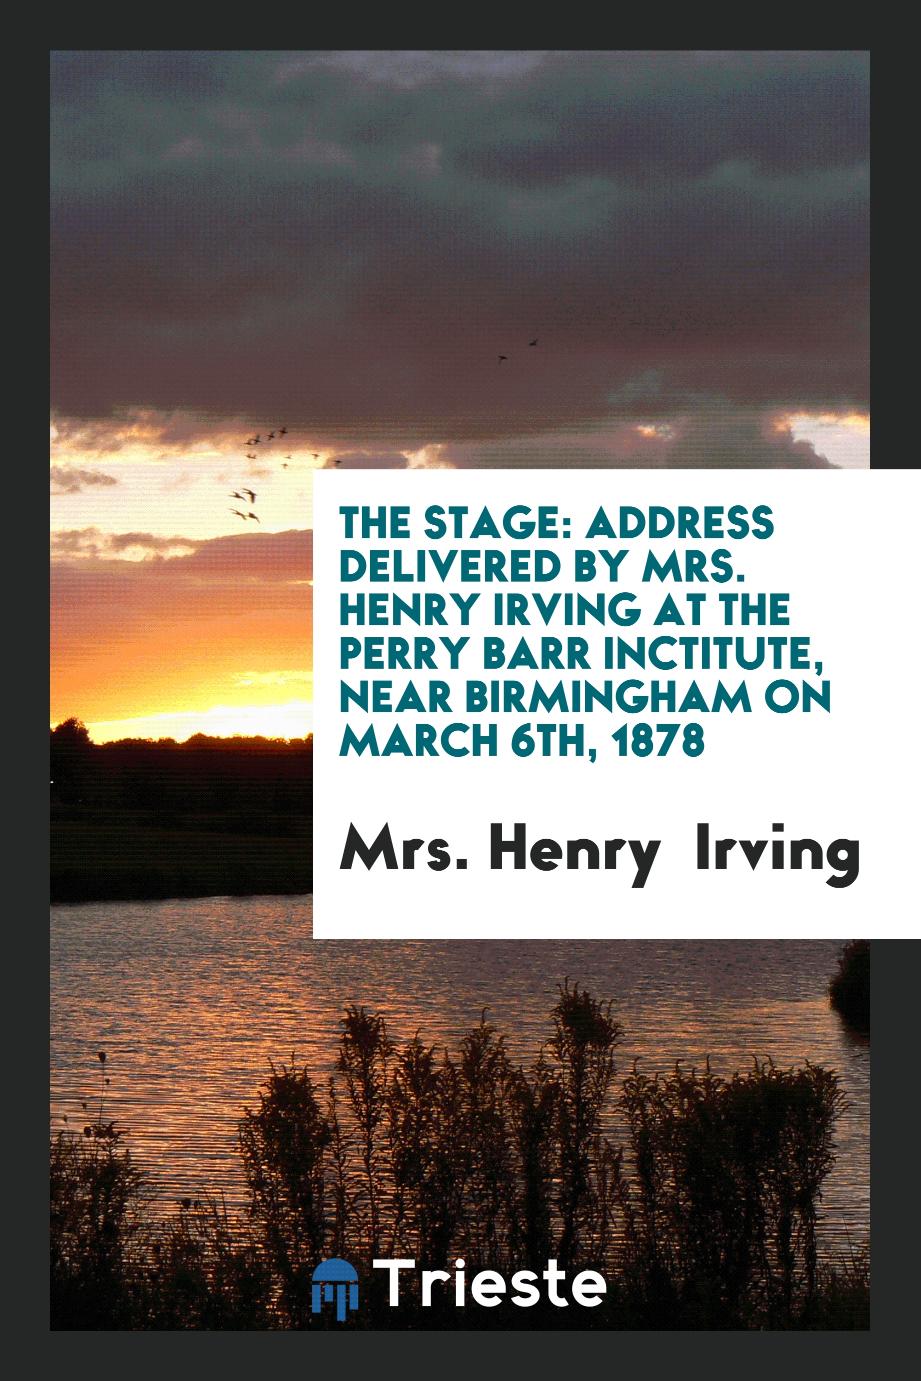 The Stage: Address delivered by Mrs. Henry Irving at the perry barr inctitute, near Birmingham on March 6th, 1878